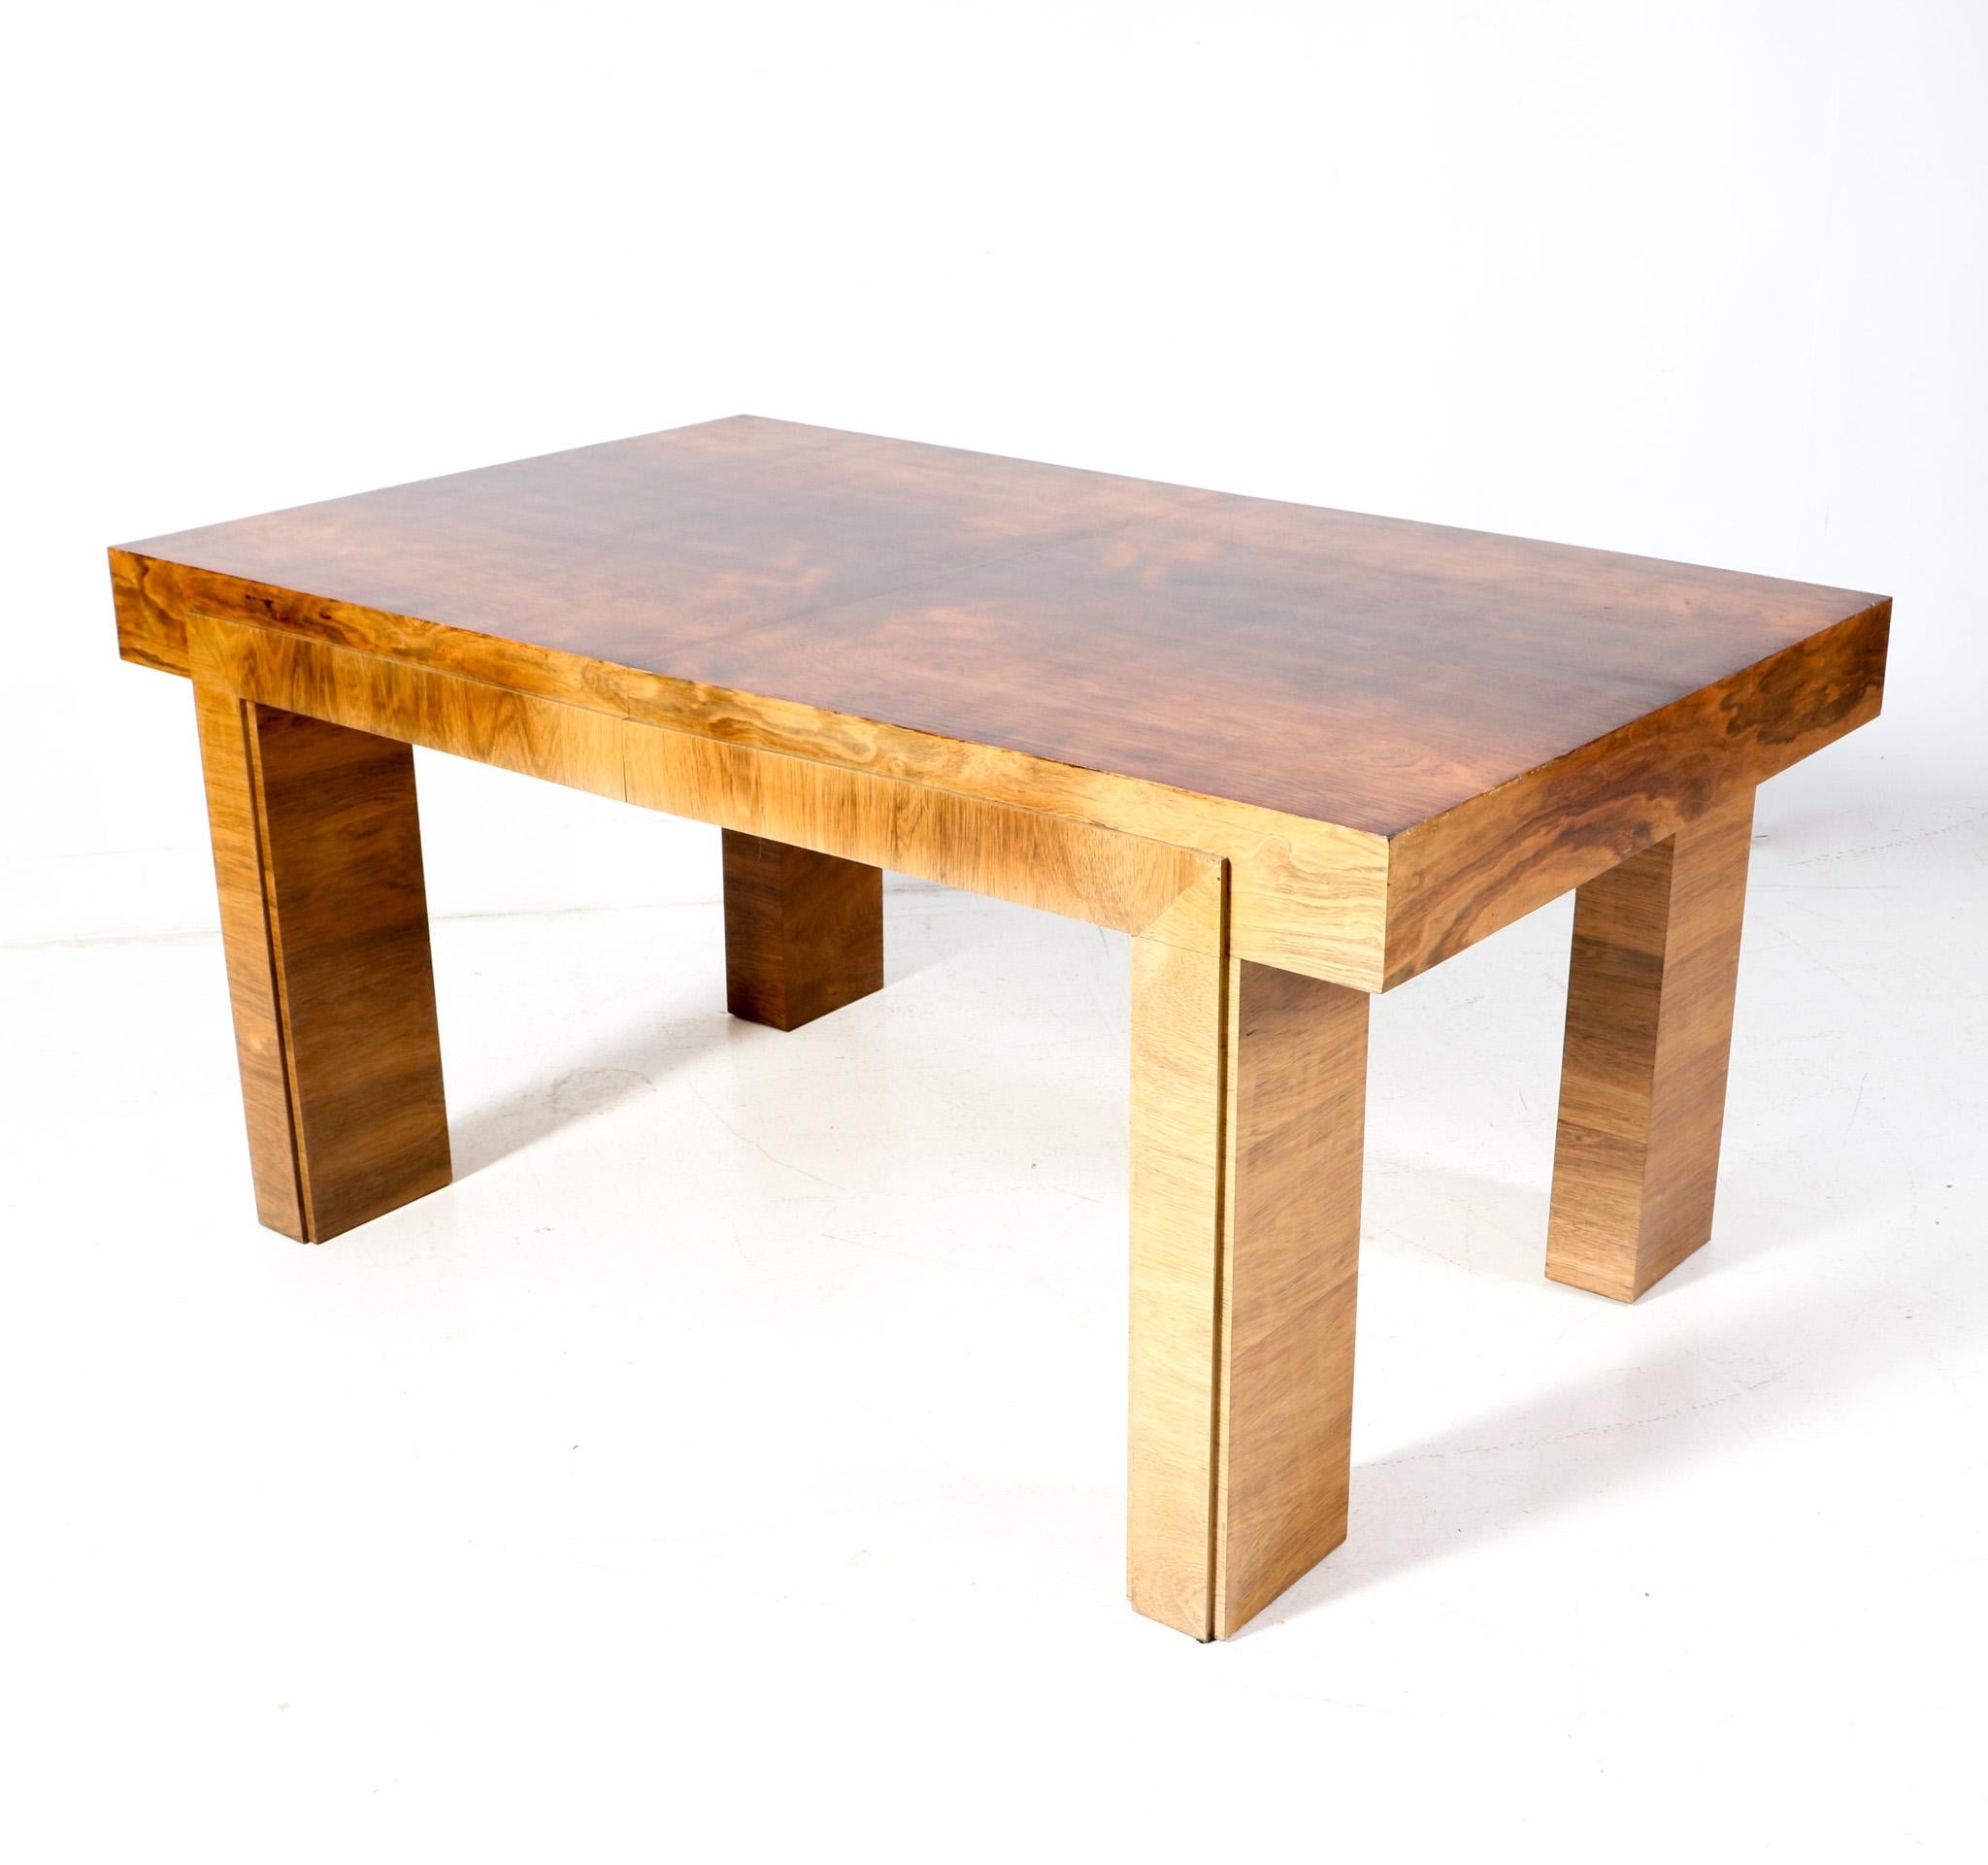  French Art Deco Walnut Table or Writing Table, 1930s For Sale 2